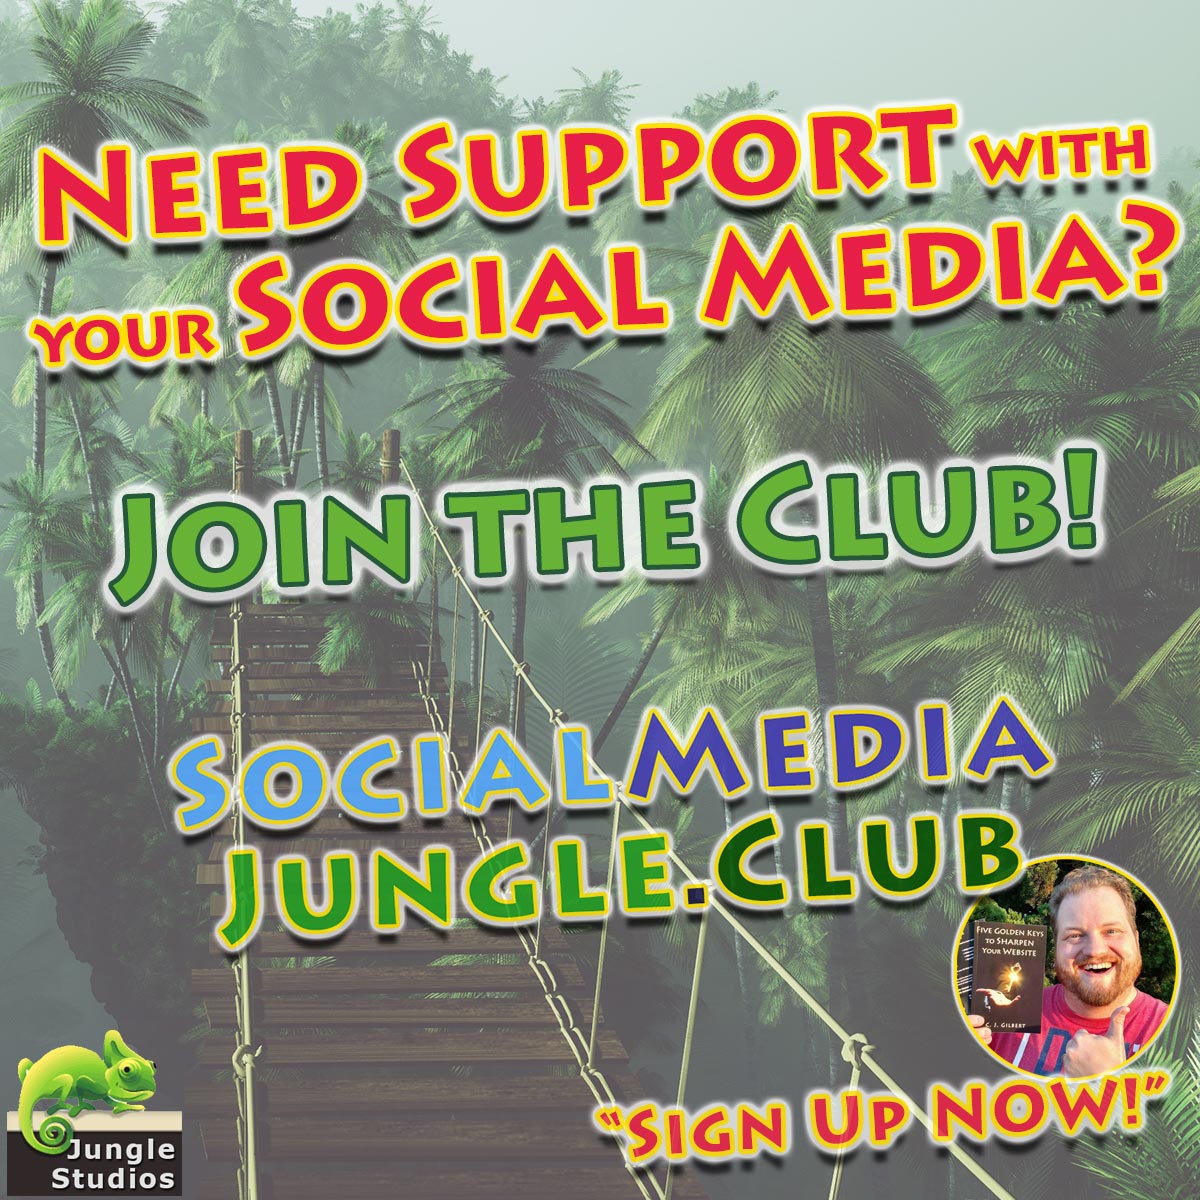 need SUPPORT with Social Media?! JOIN the Club!